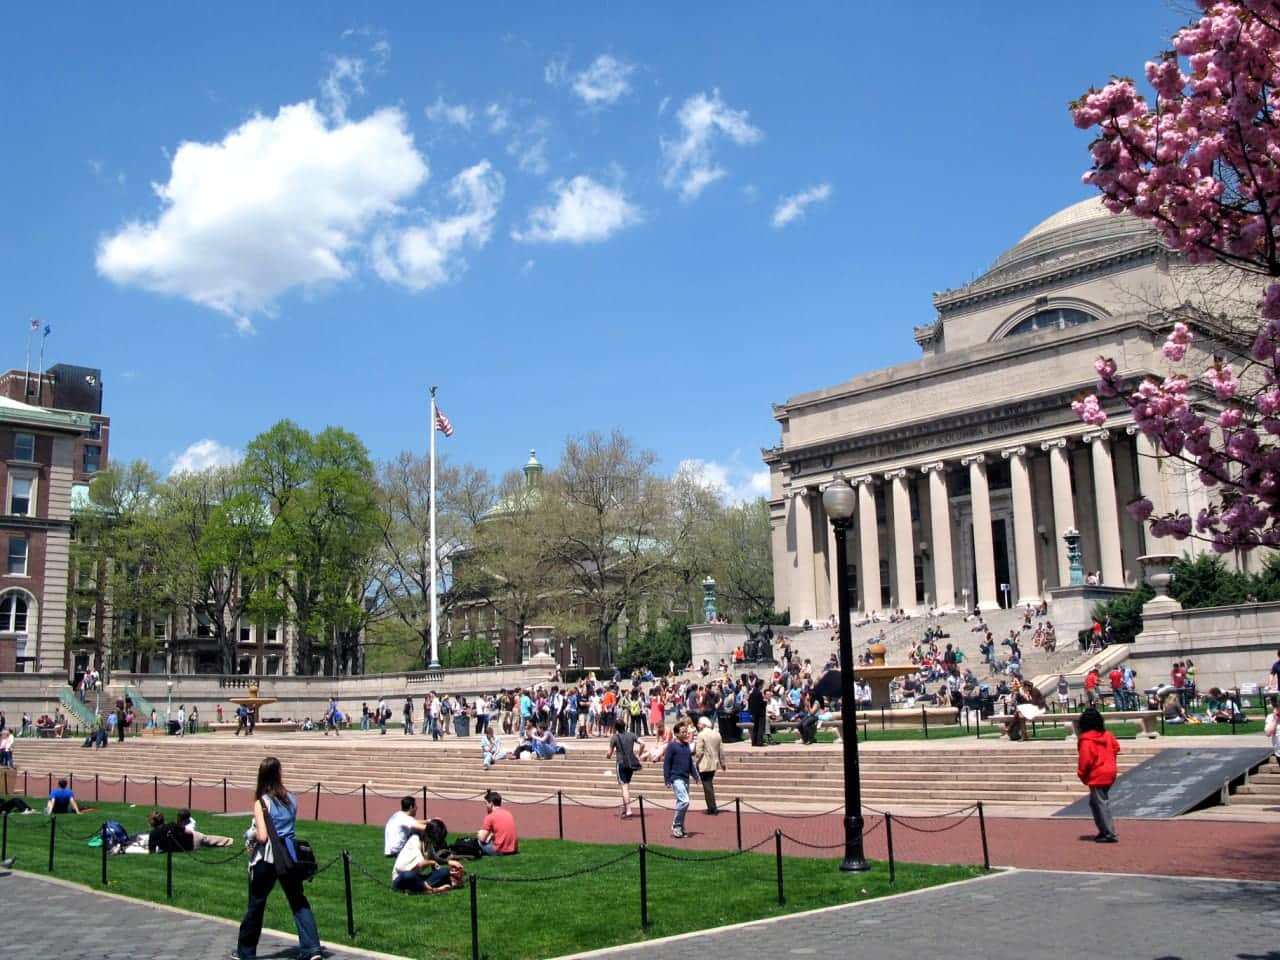 Columbia University, based in upper Manhattan just 17 miles from Westchester County, was ranked No. 1 in New York state on niche.com's latest "best colleges" list.